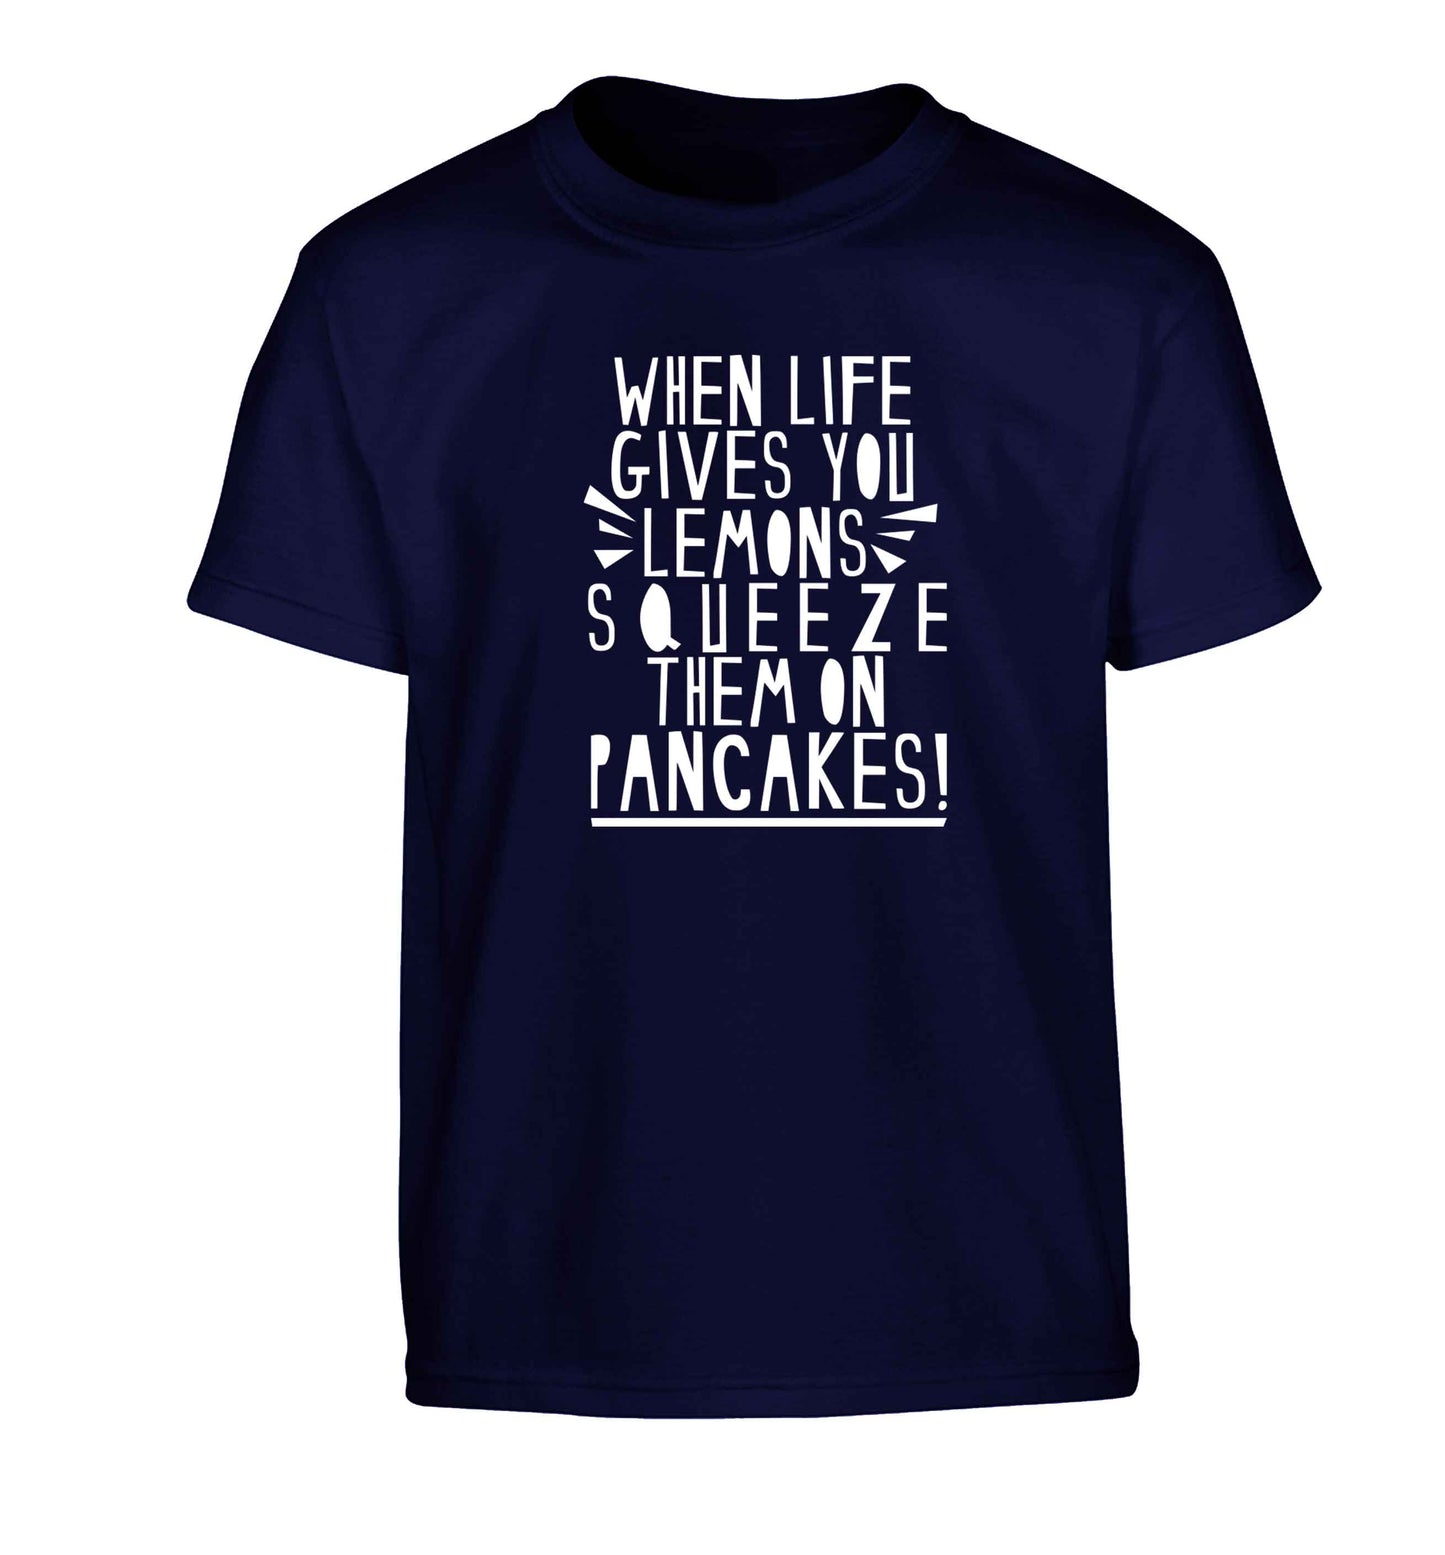 When life gives you lemons squeeze them on pancakes! Children's navy Tshirt 12-13 Years